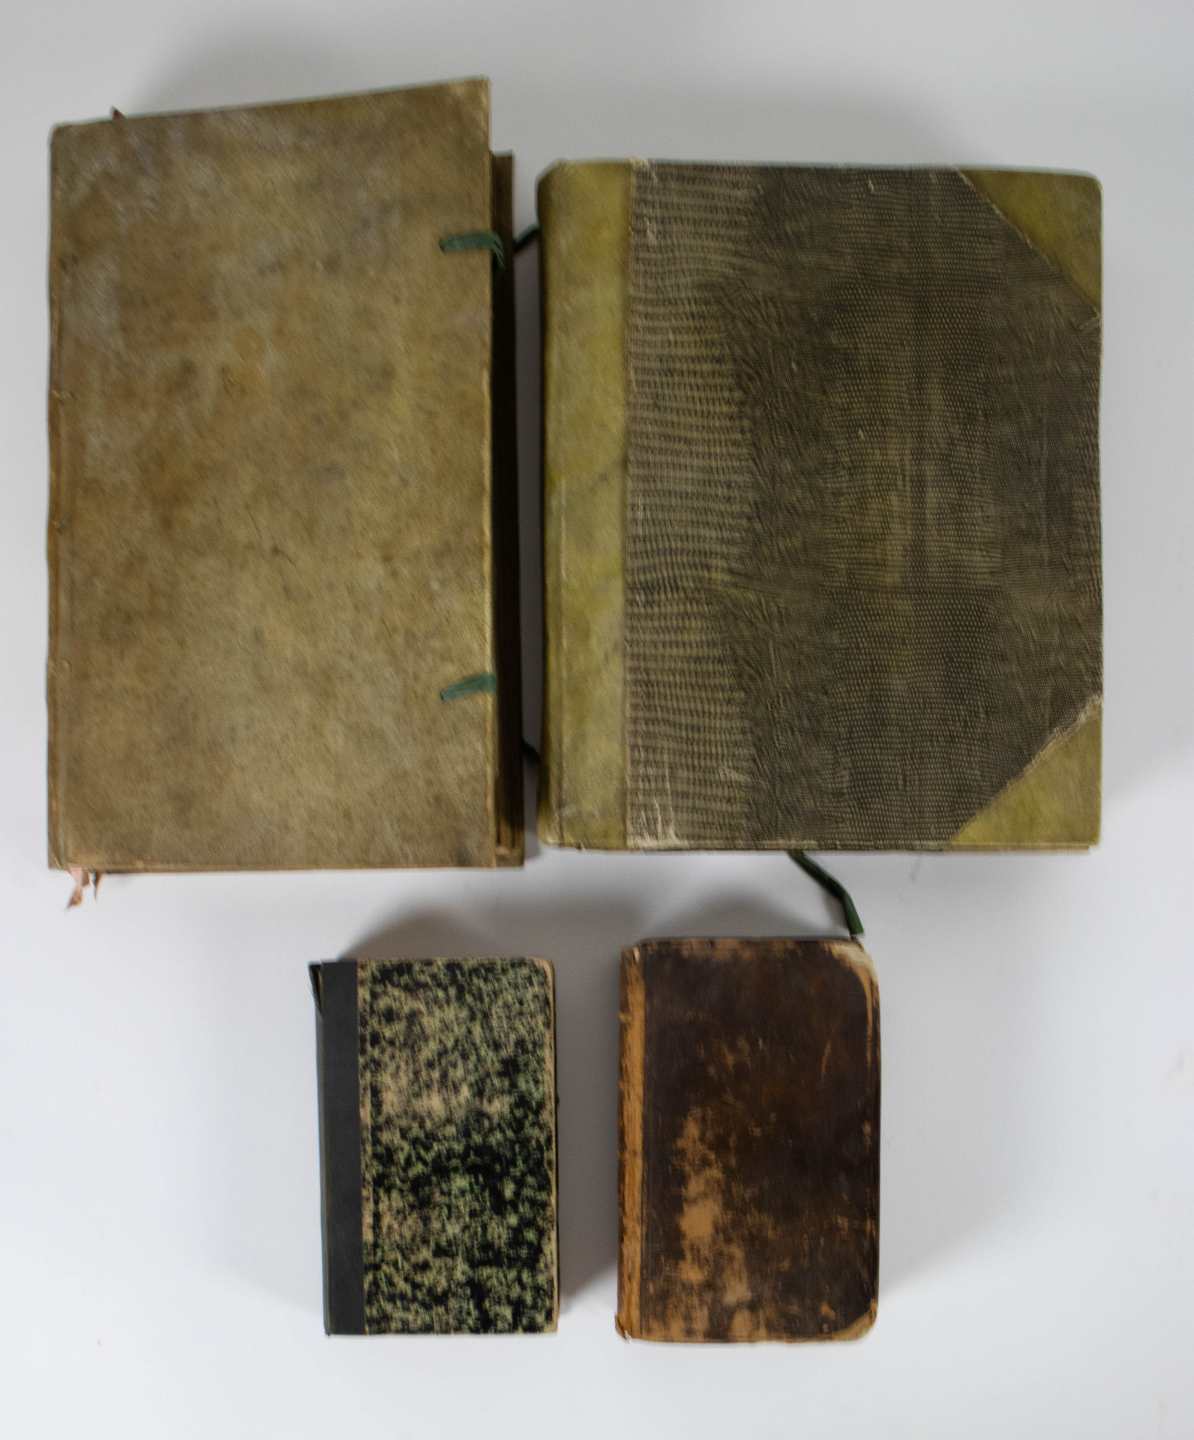 Lot with 4 antiquarian books 18/19th century